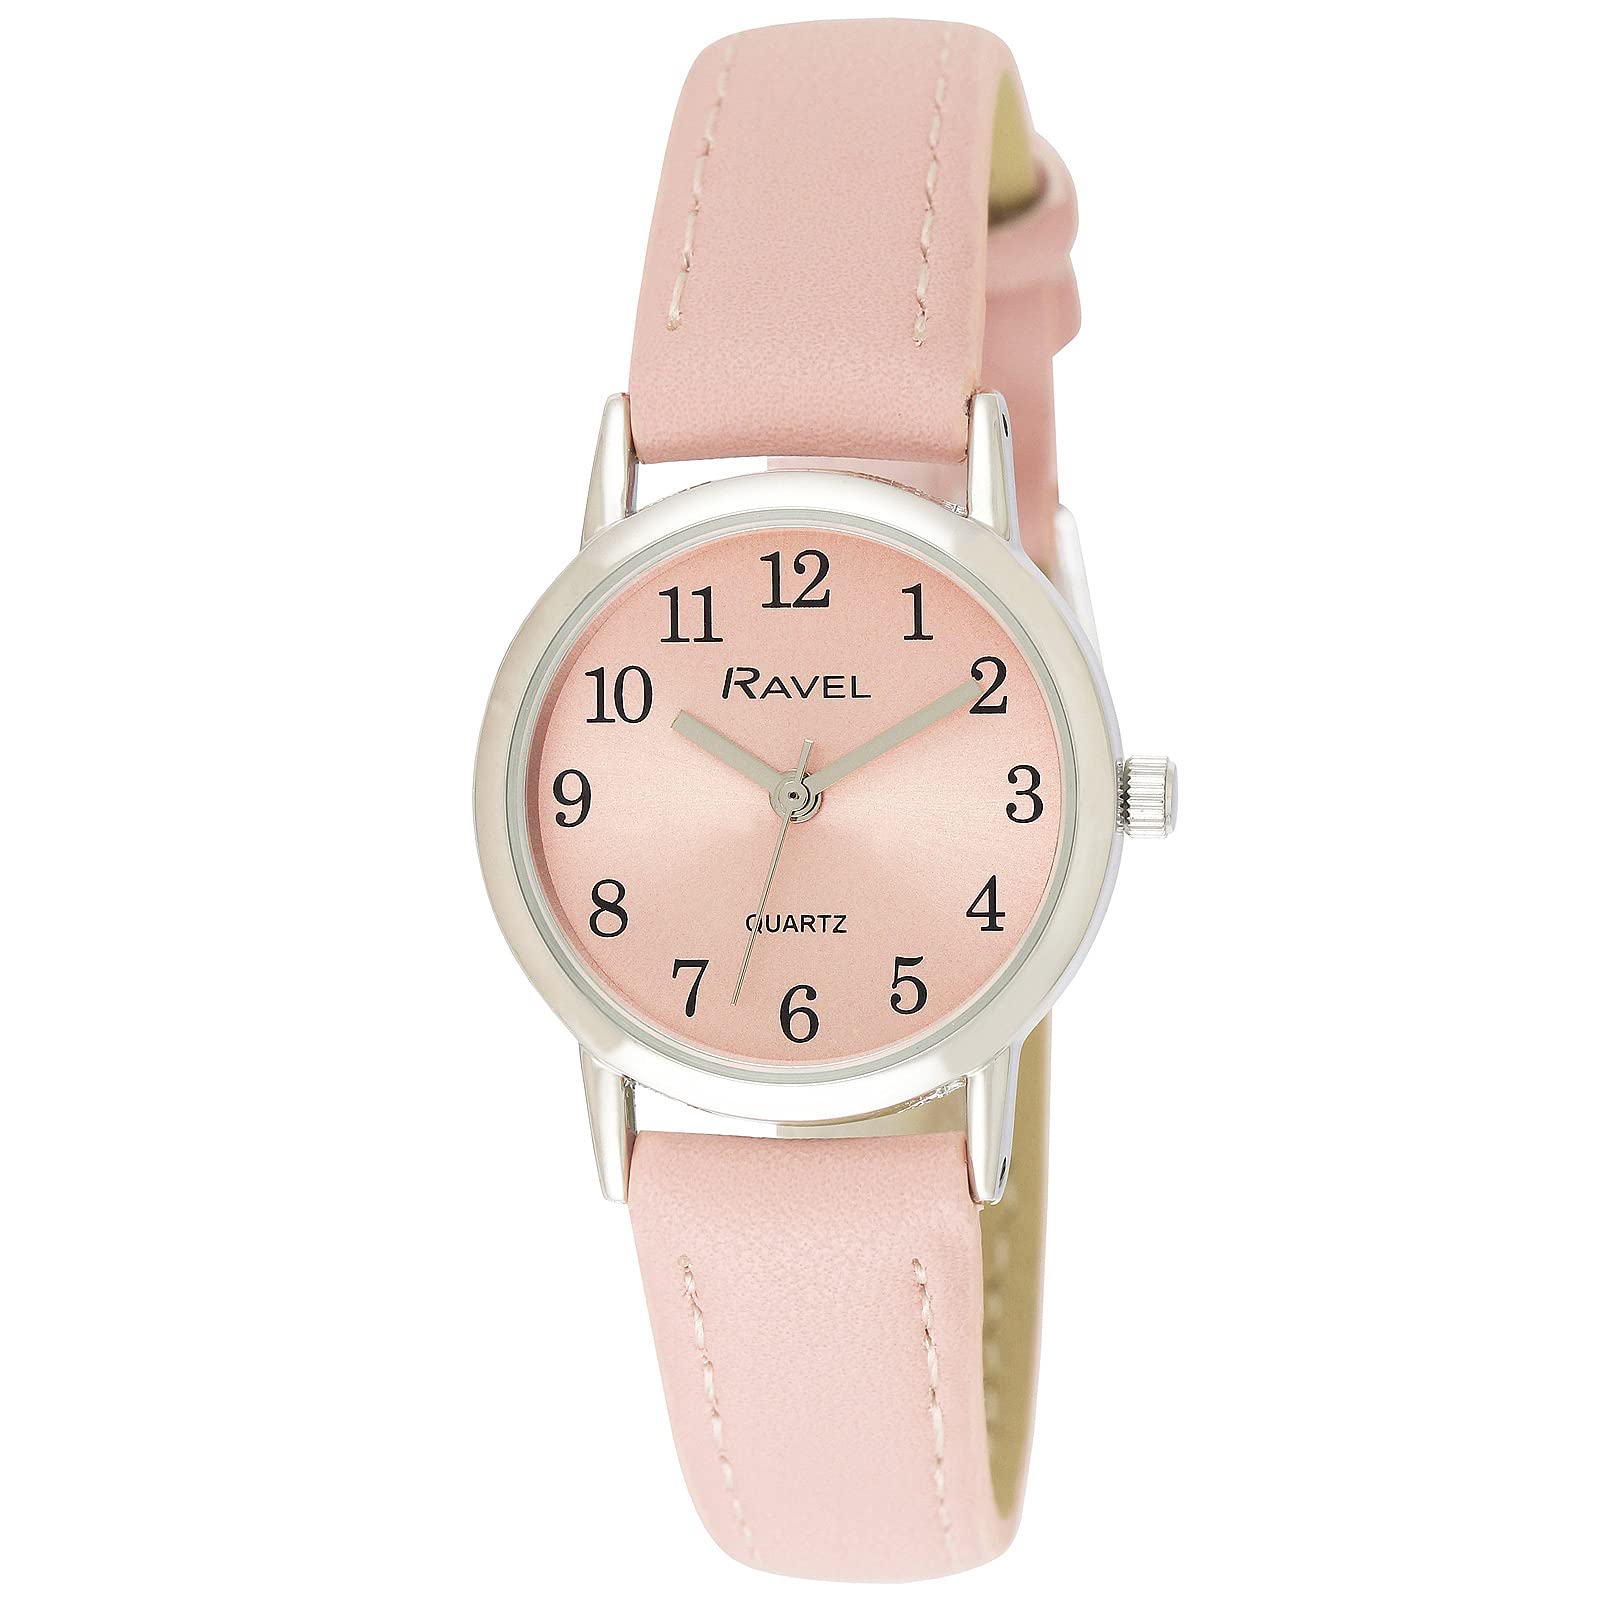 Ravel - Women's Pastel Coloured Everyday Silver Tone Watch (27mm case)